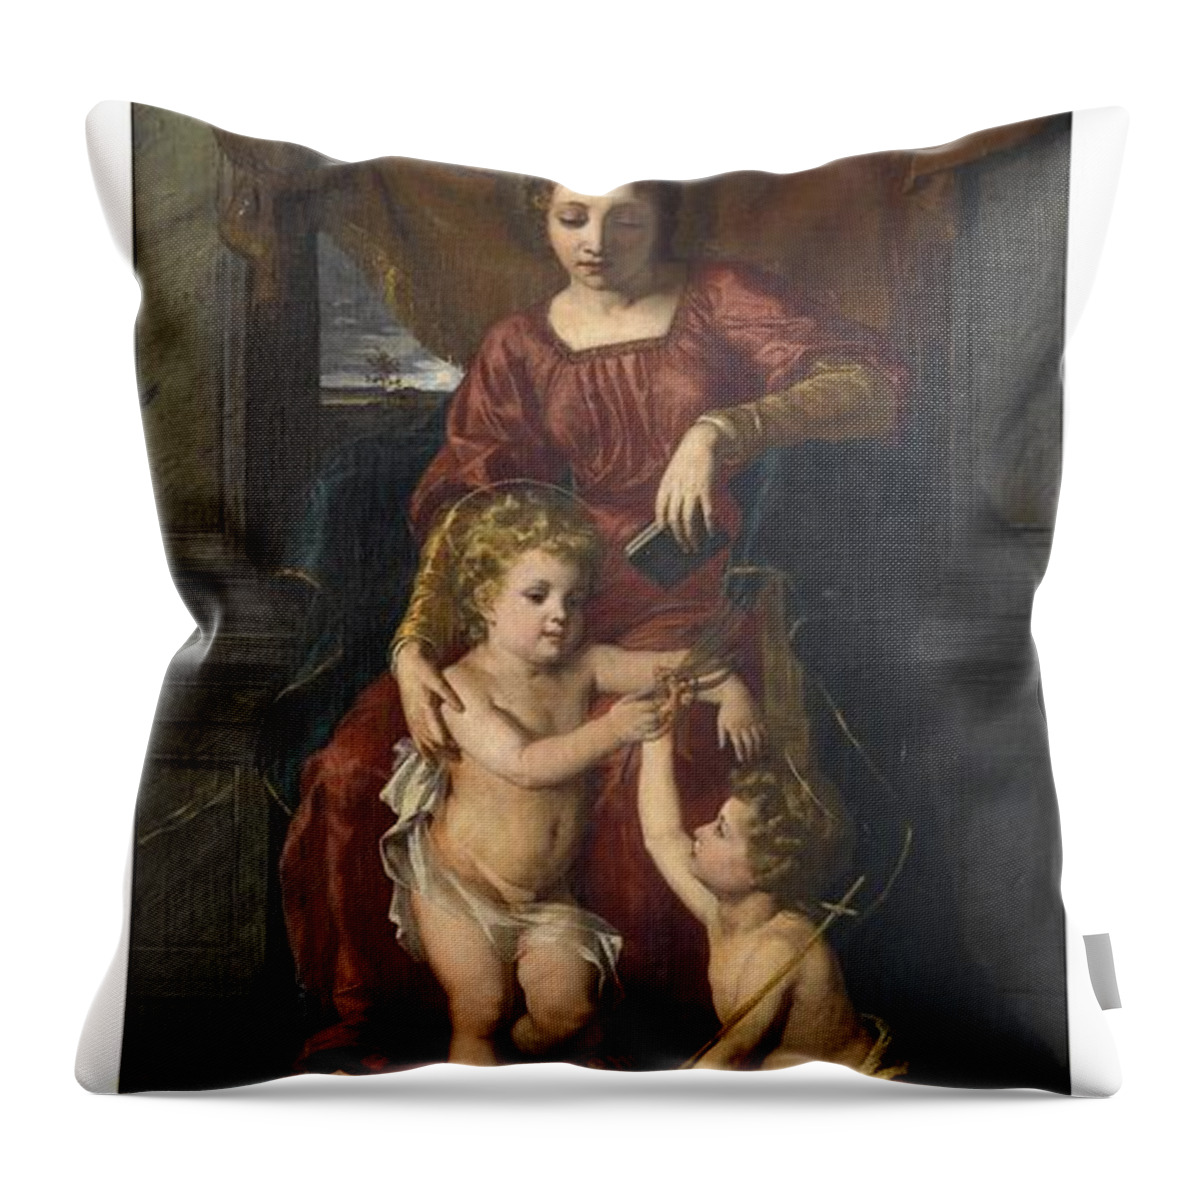 Vintage Throw Pillow featuring the painting Rudolph Ernst Maria, John and the Child Jesus, 1875 by MotionAge Designs